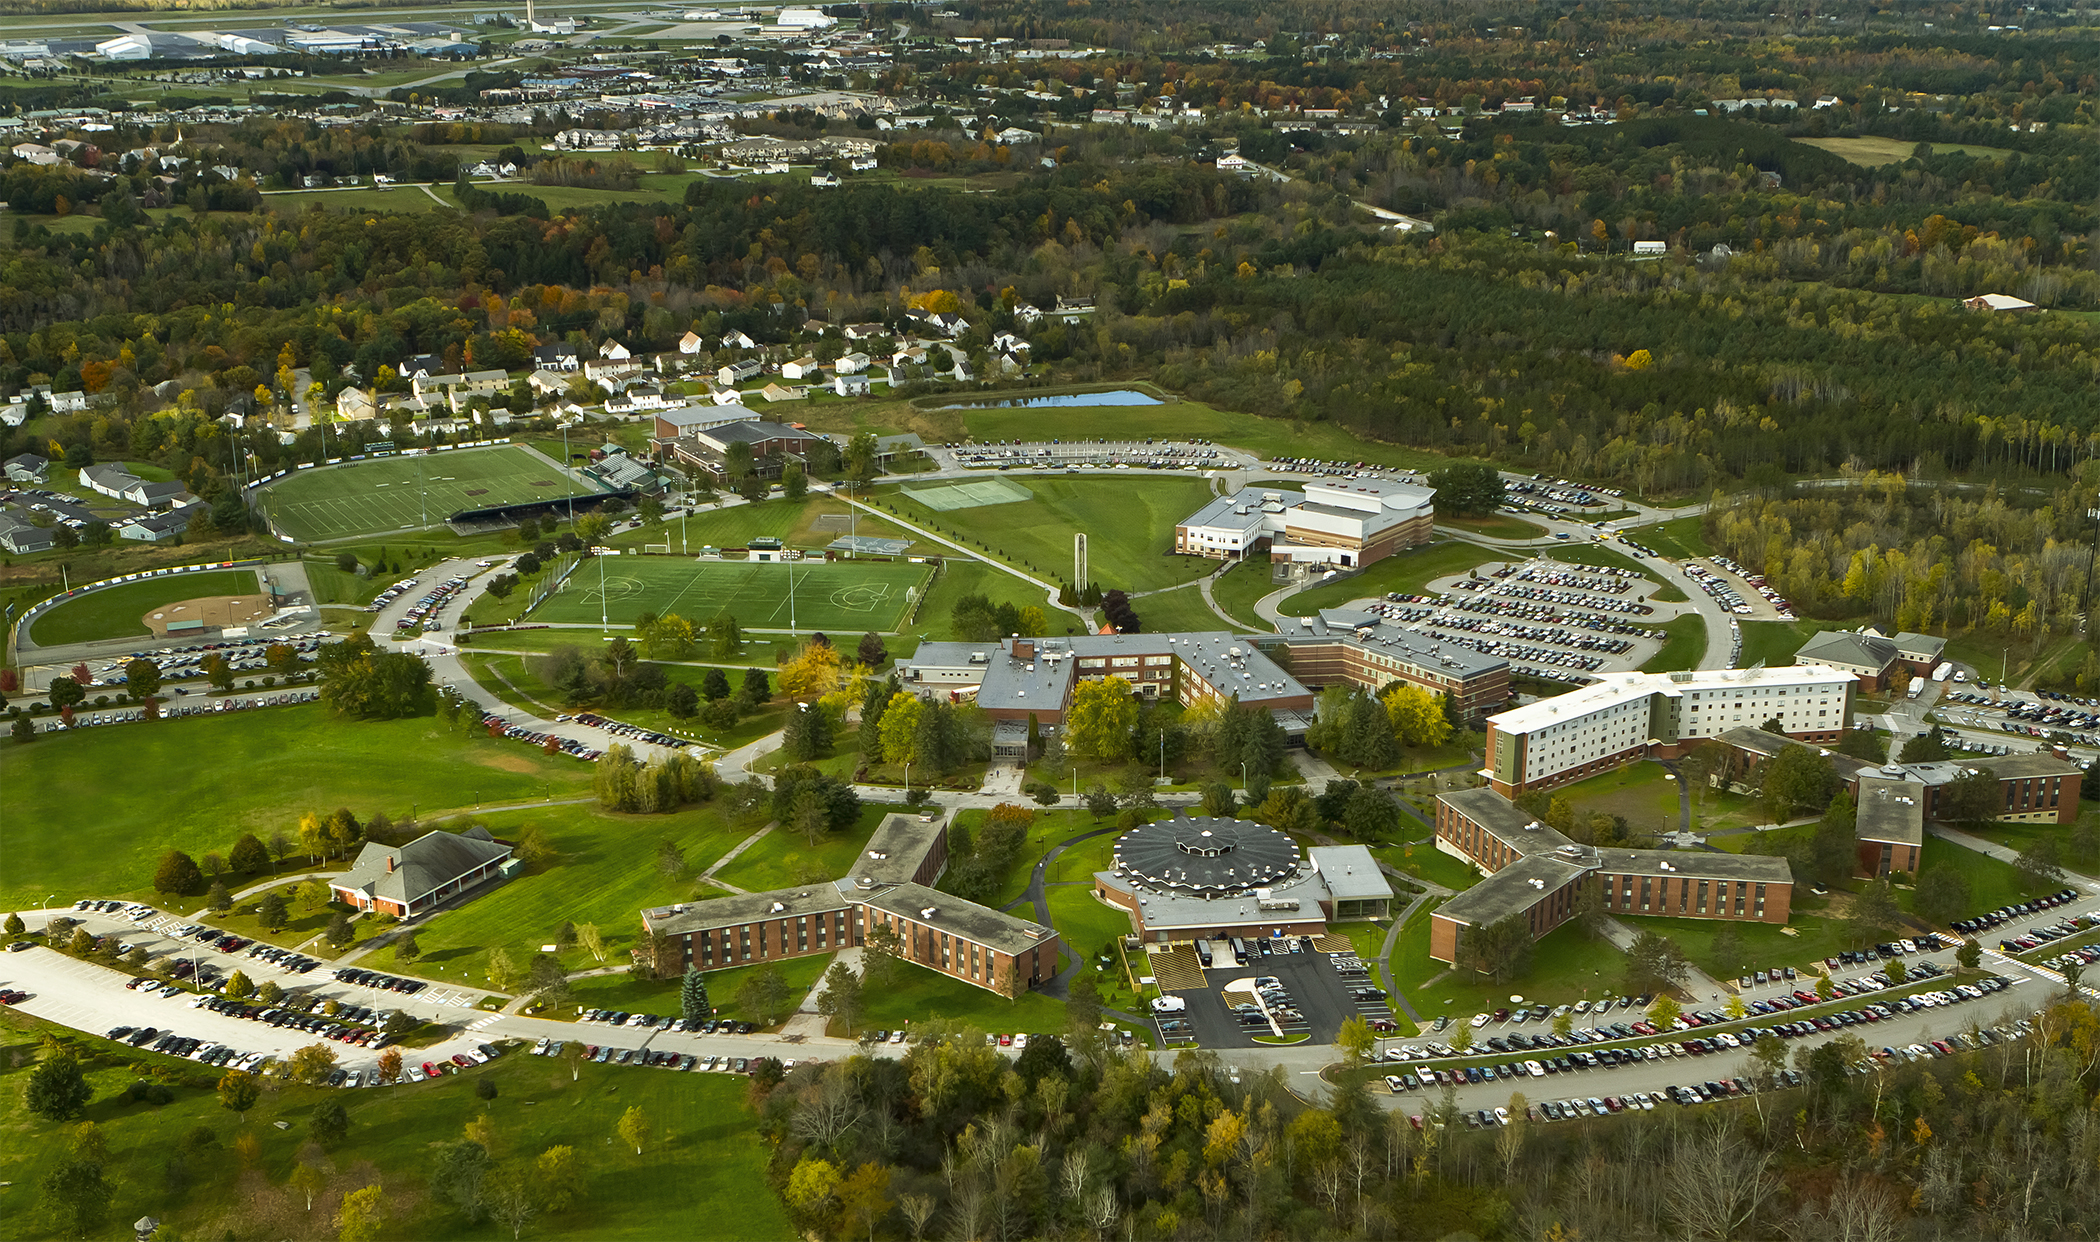 Husson University has a 208-acre beautiful campus in scenic Bangor, Maine.